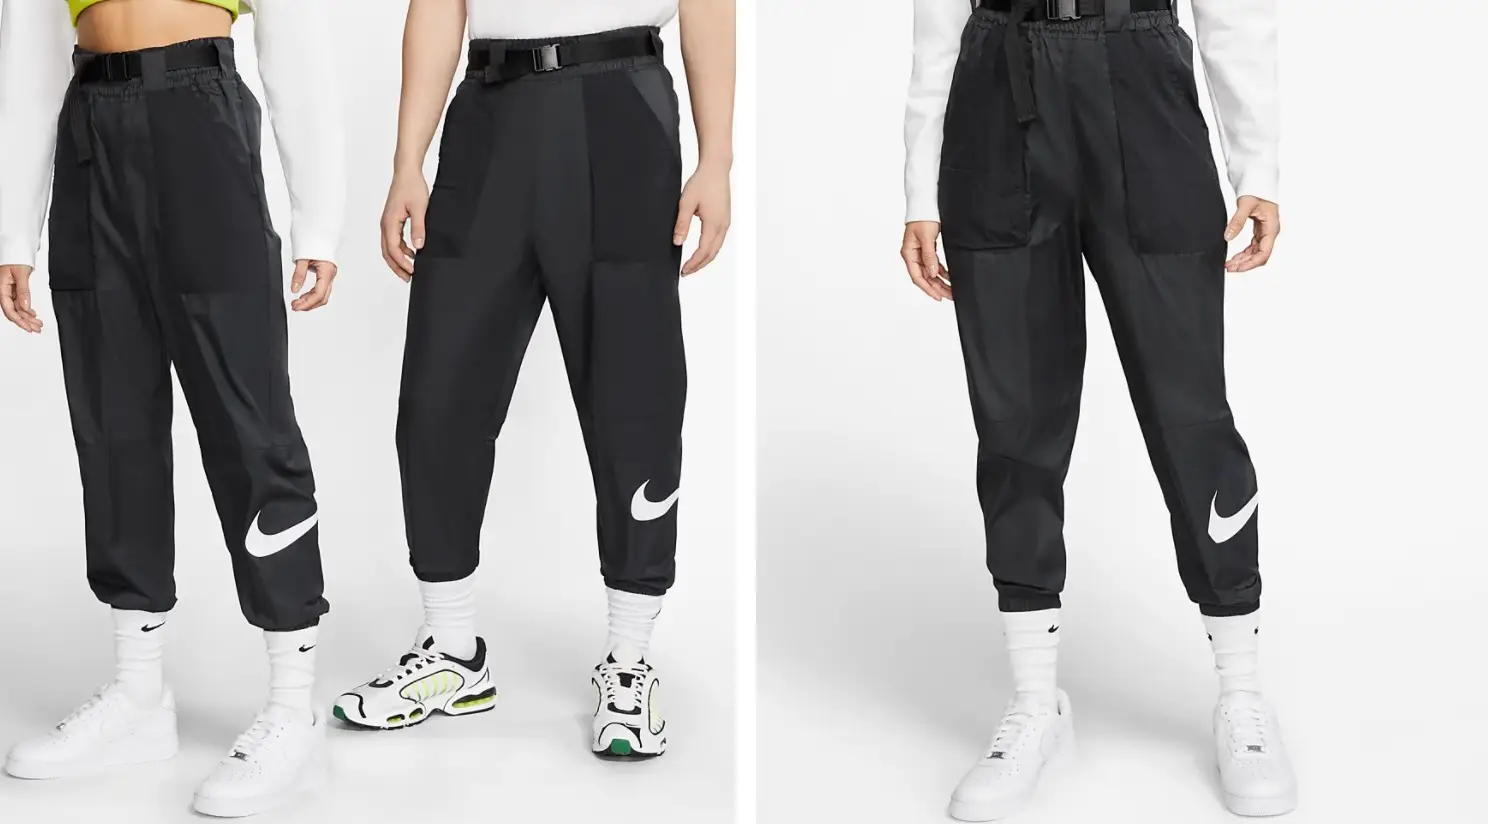 Chill Out In Style With This Nike Set Available In 3 Colourways | The ...